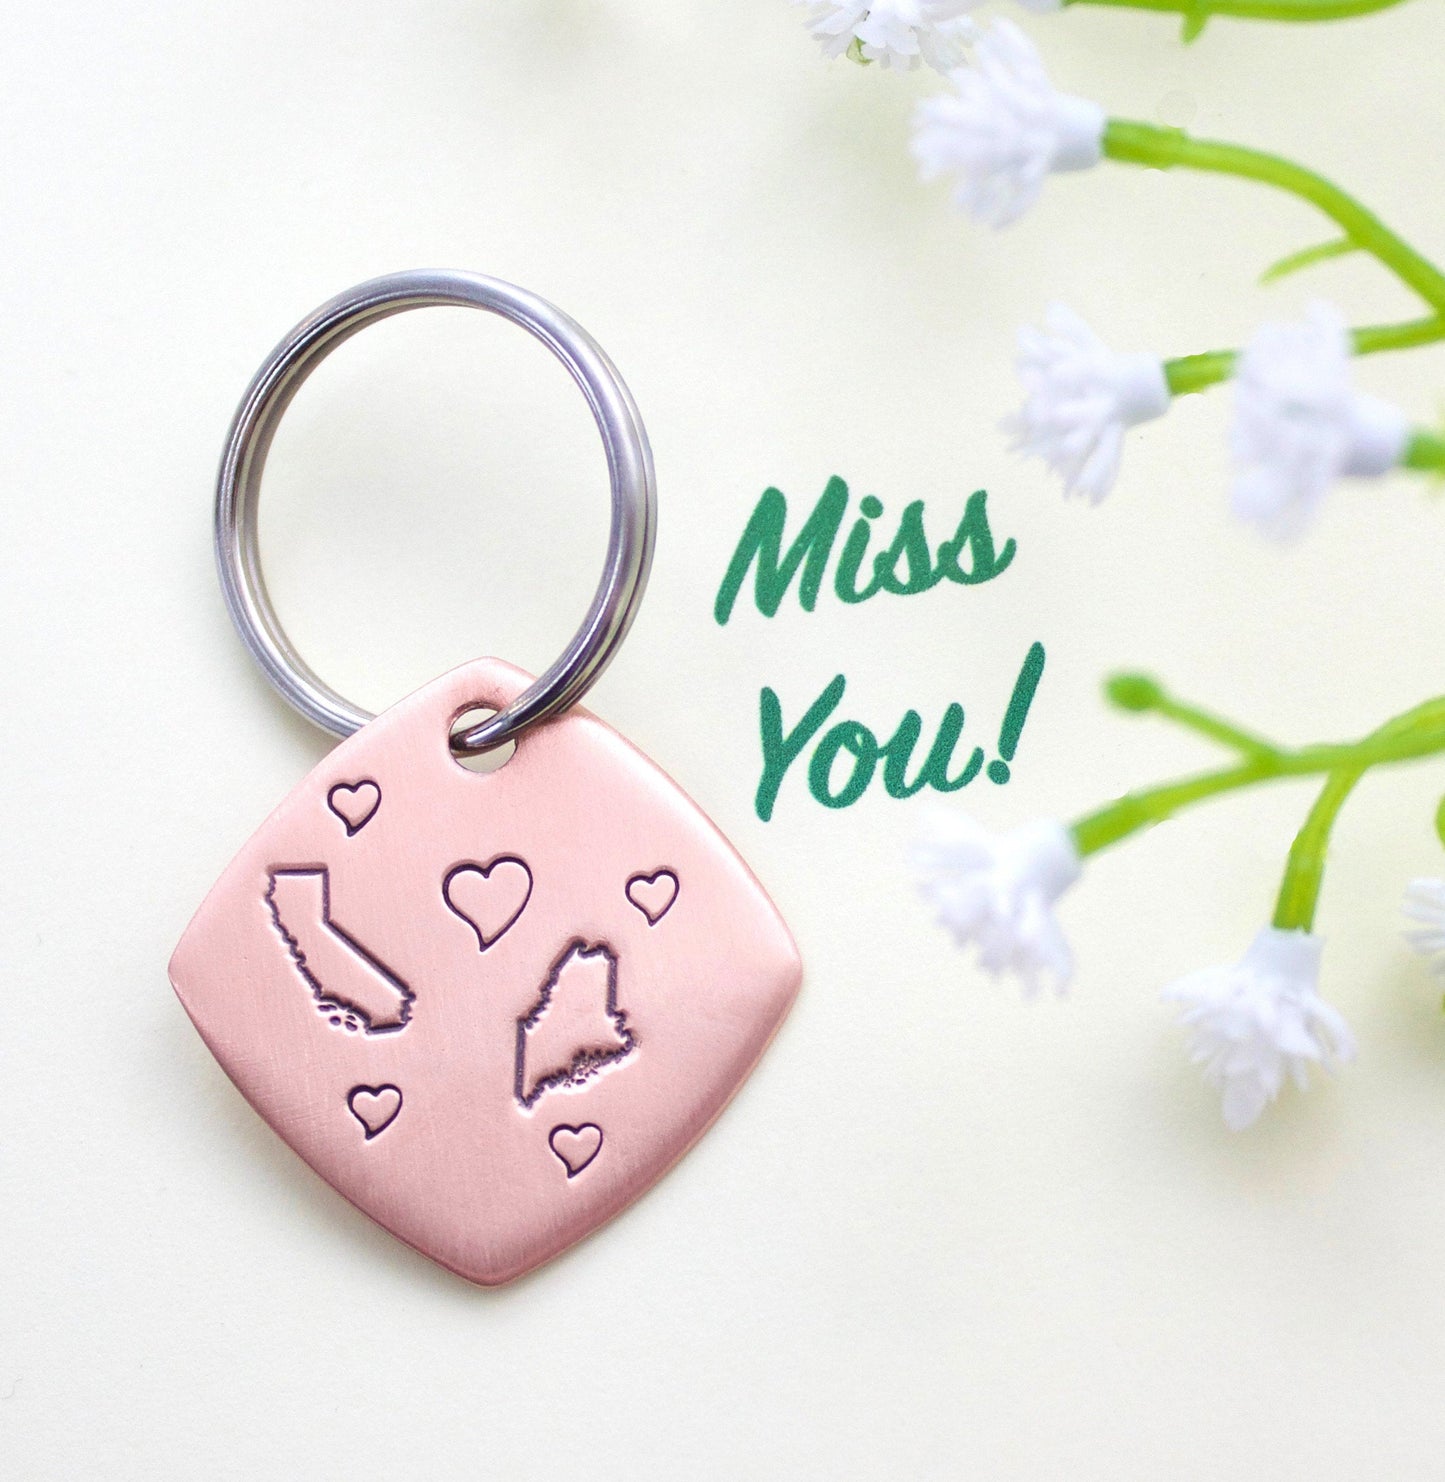 Keychain with two states and hearts